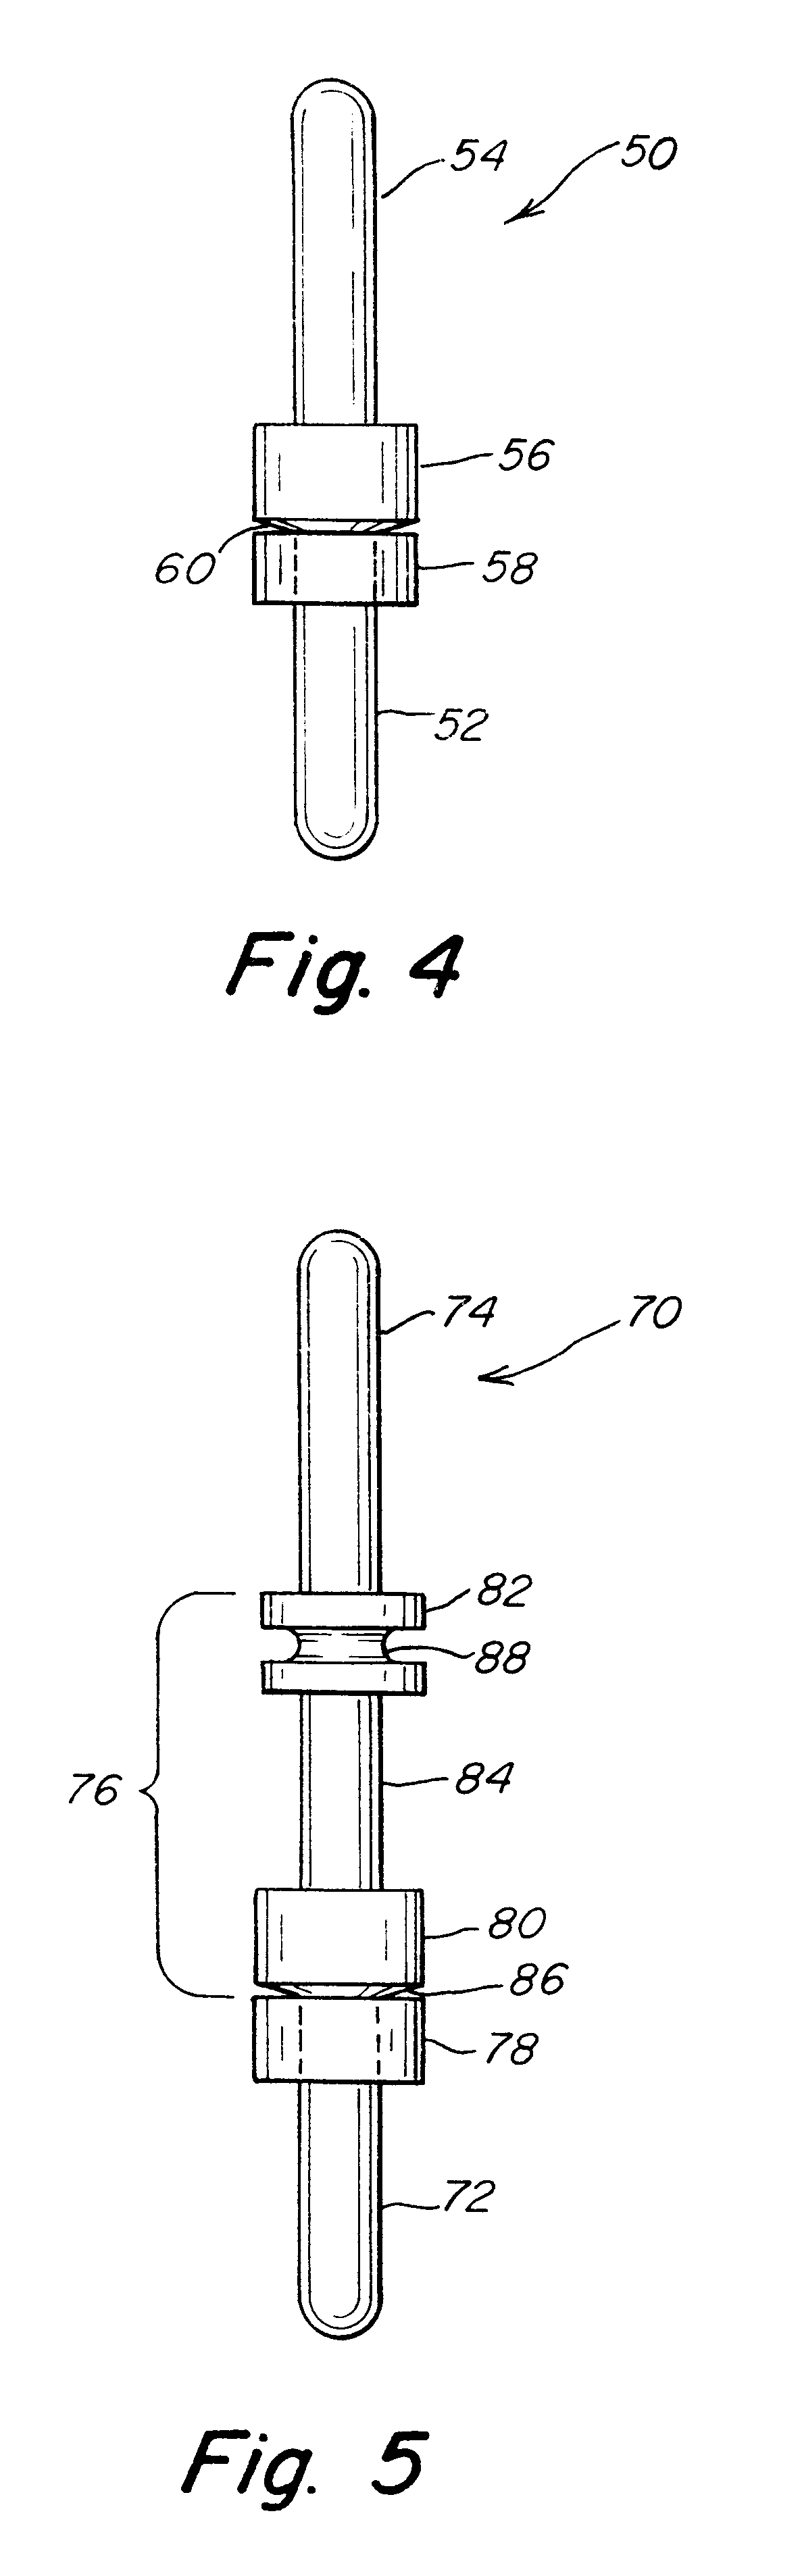 Electrical contact for a printed circuit board